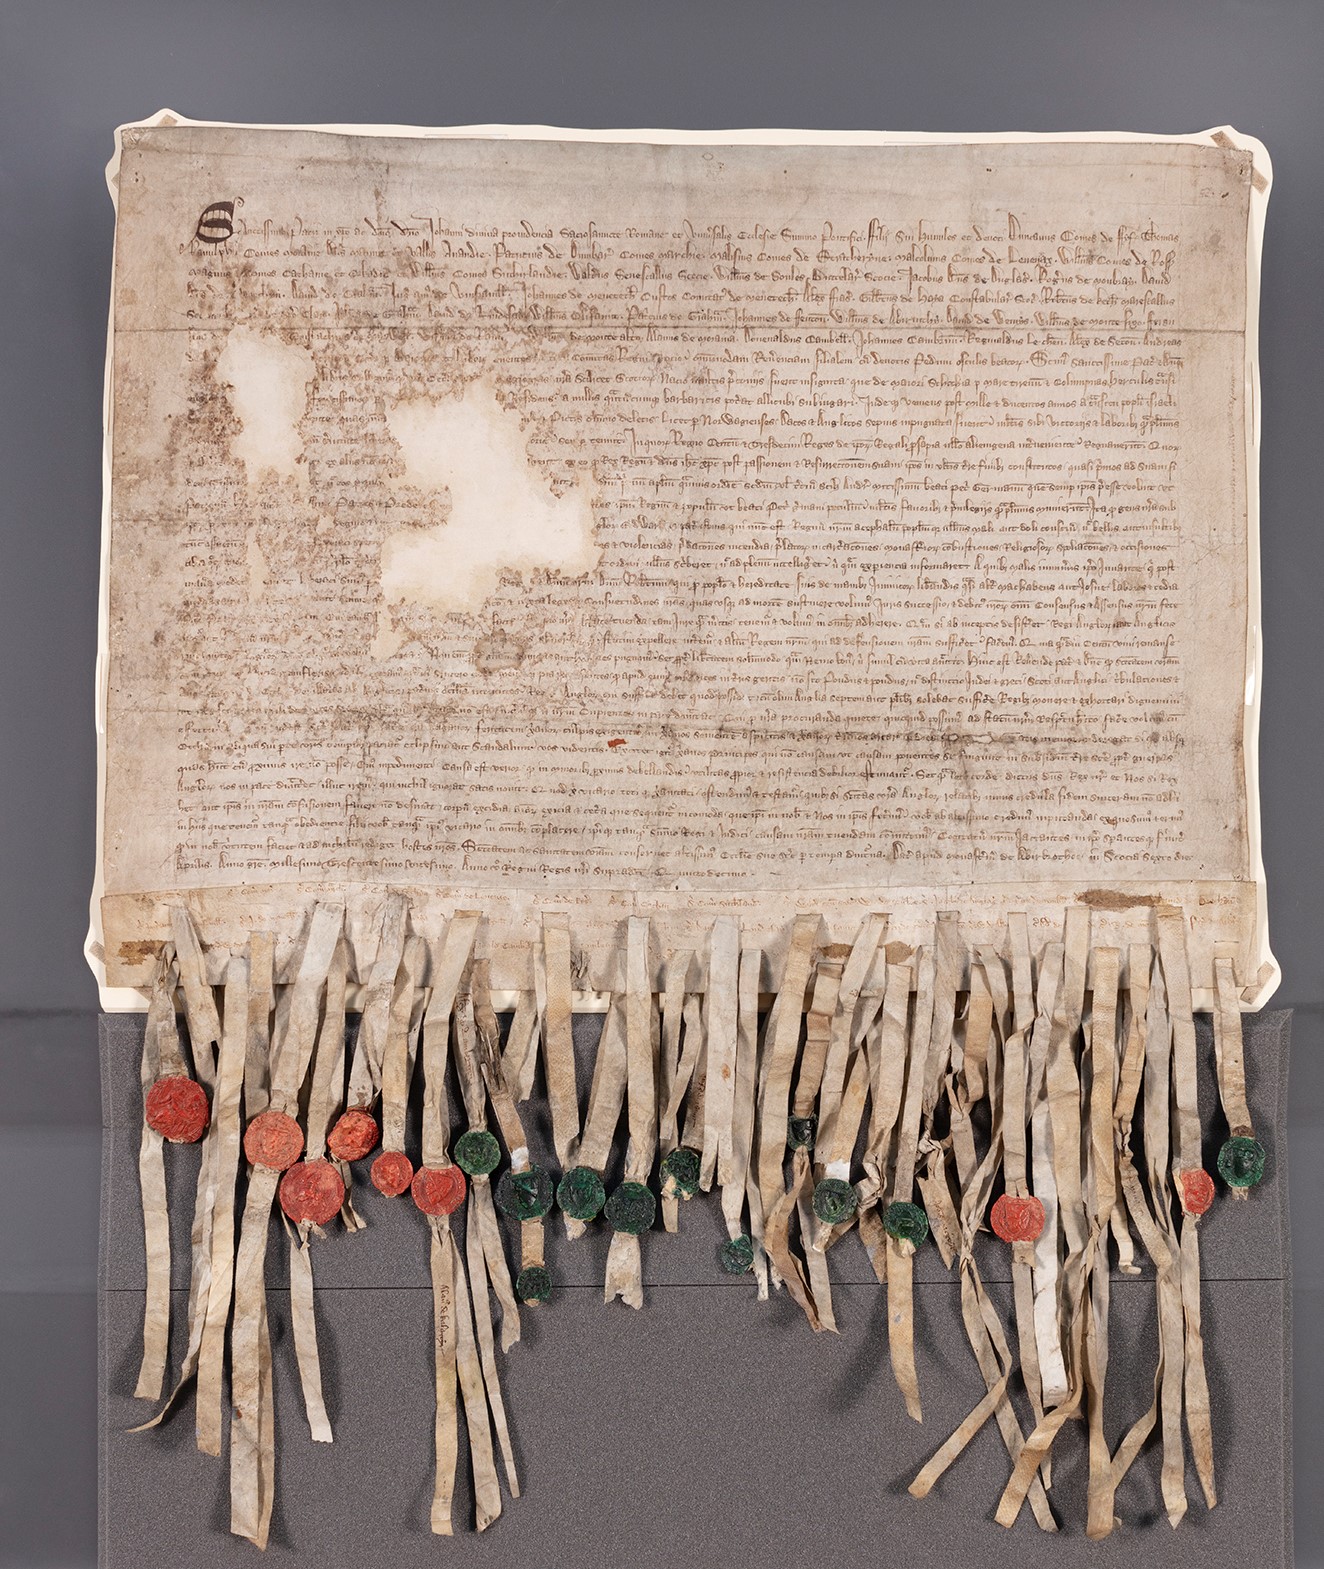 Image of the Declaration of Arbroath